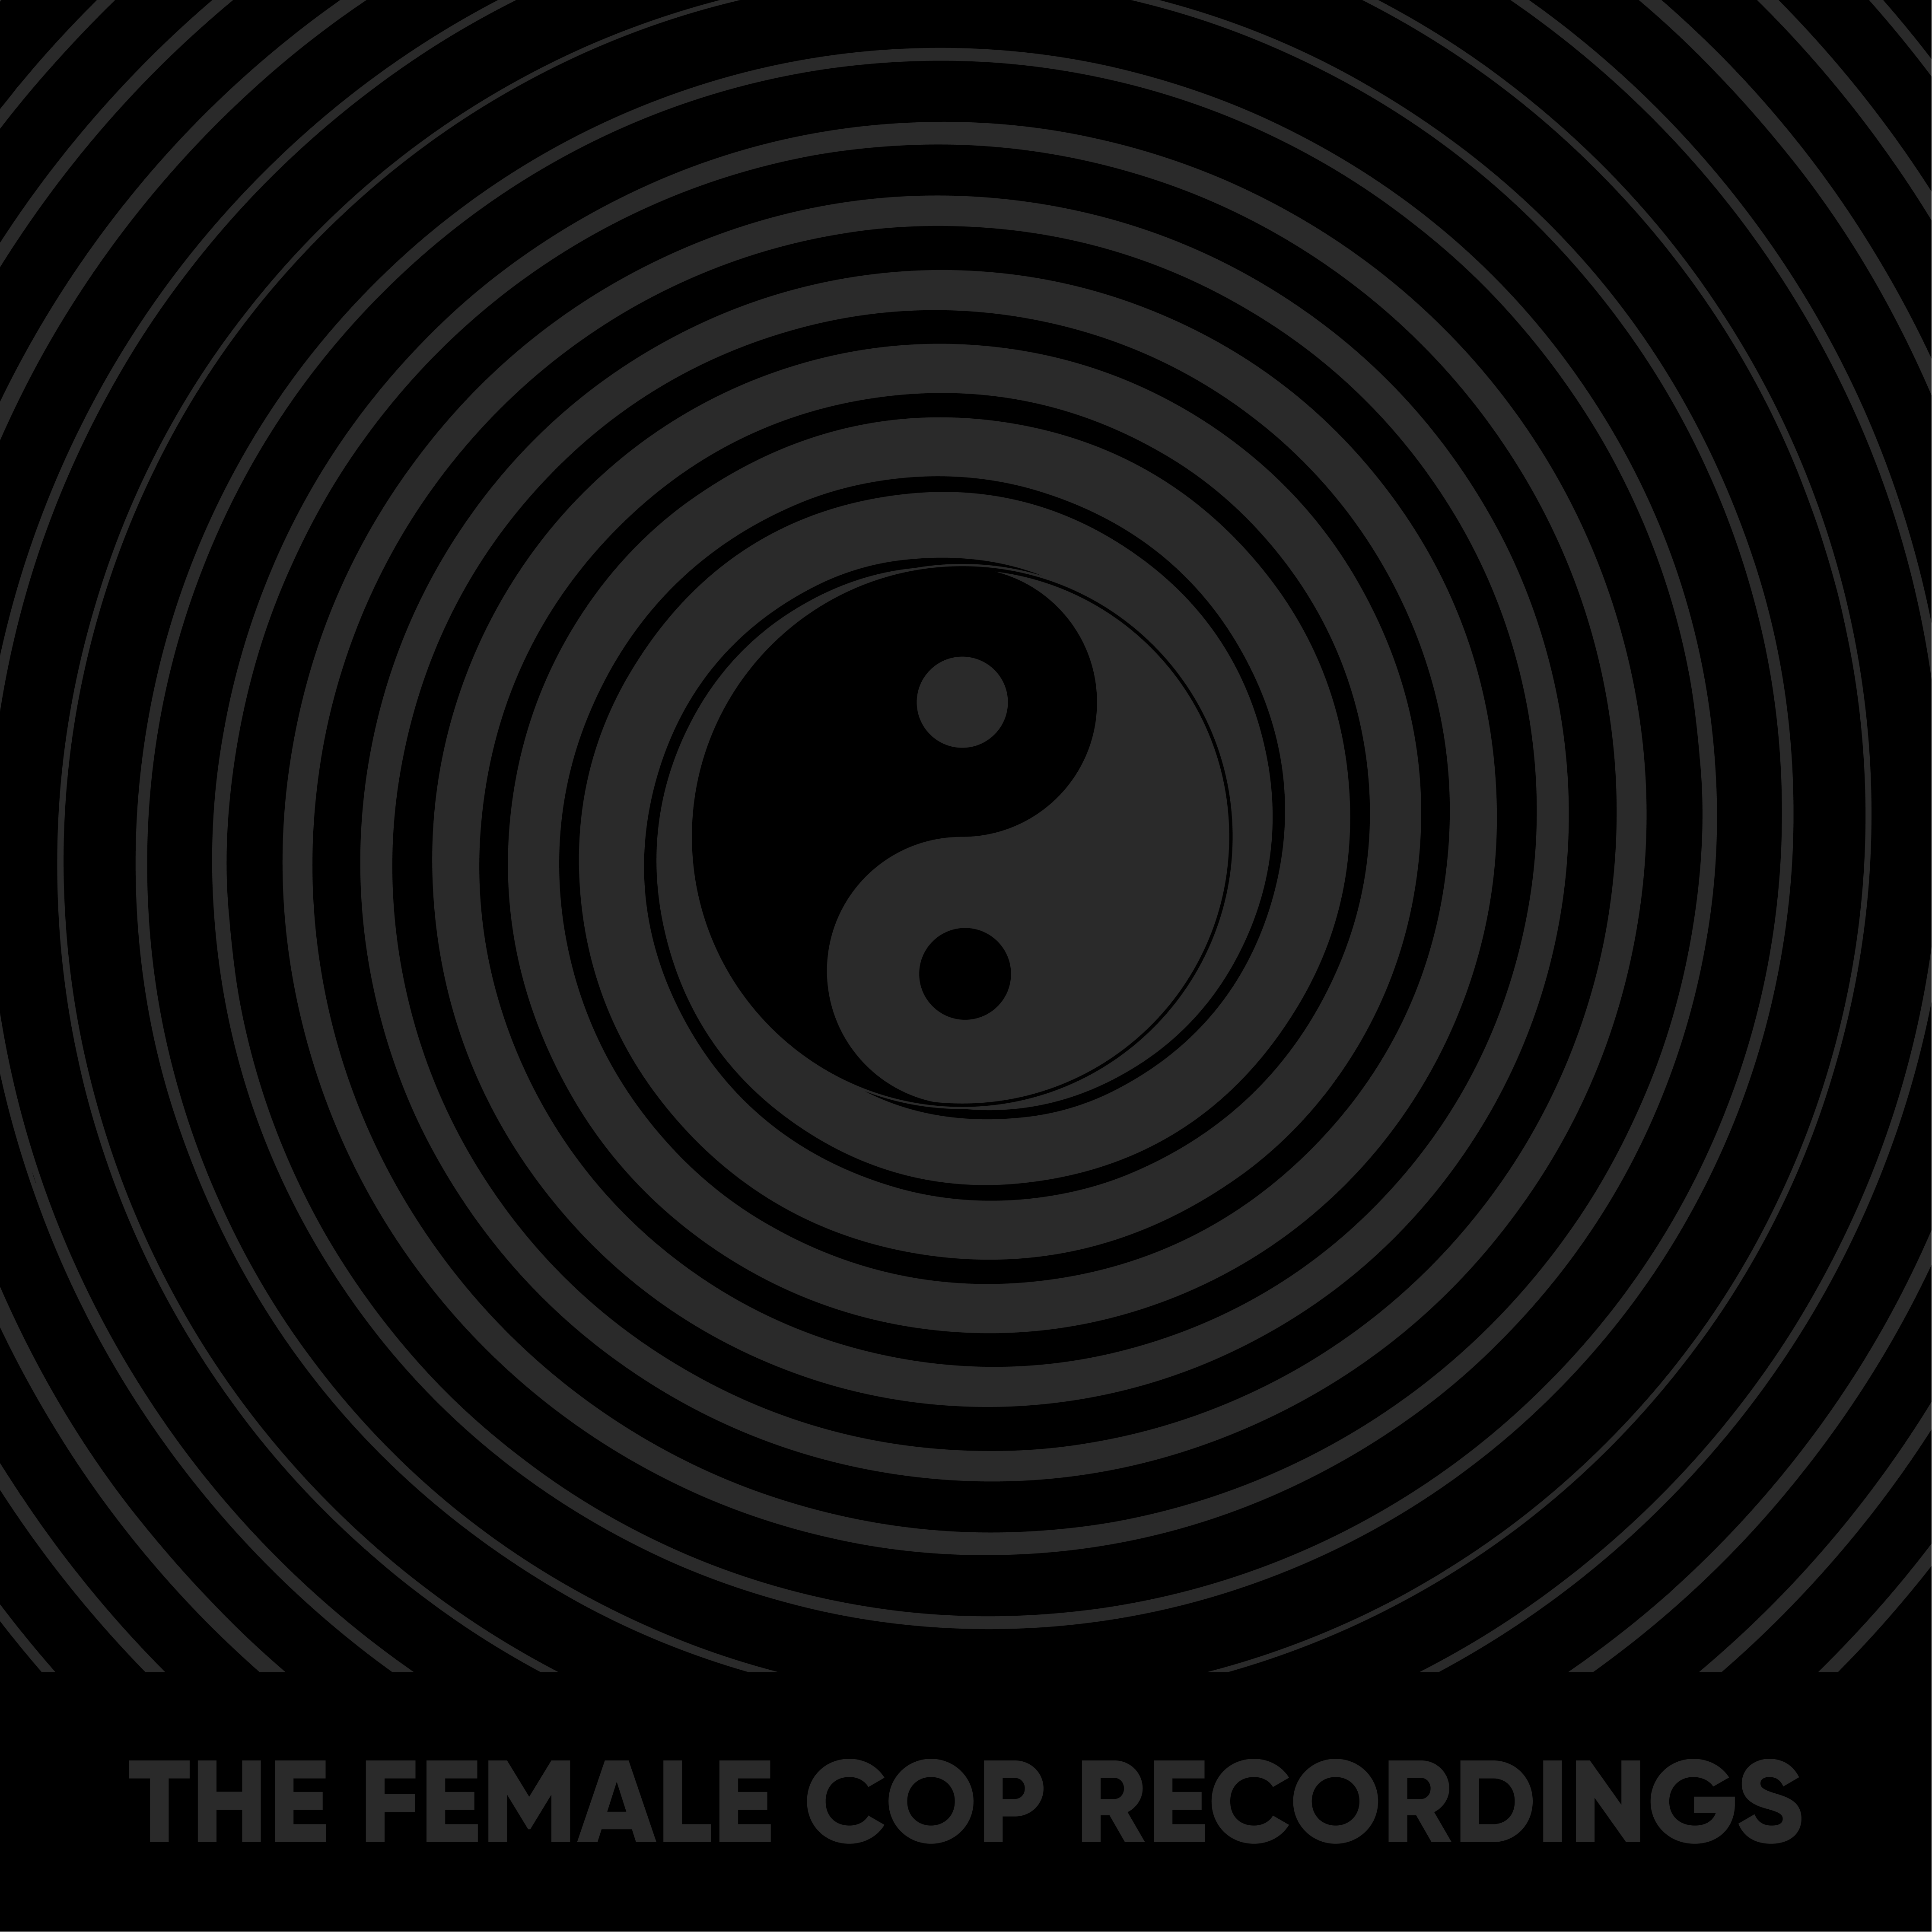 The Female Cop Recordings cover